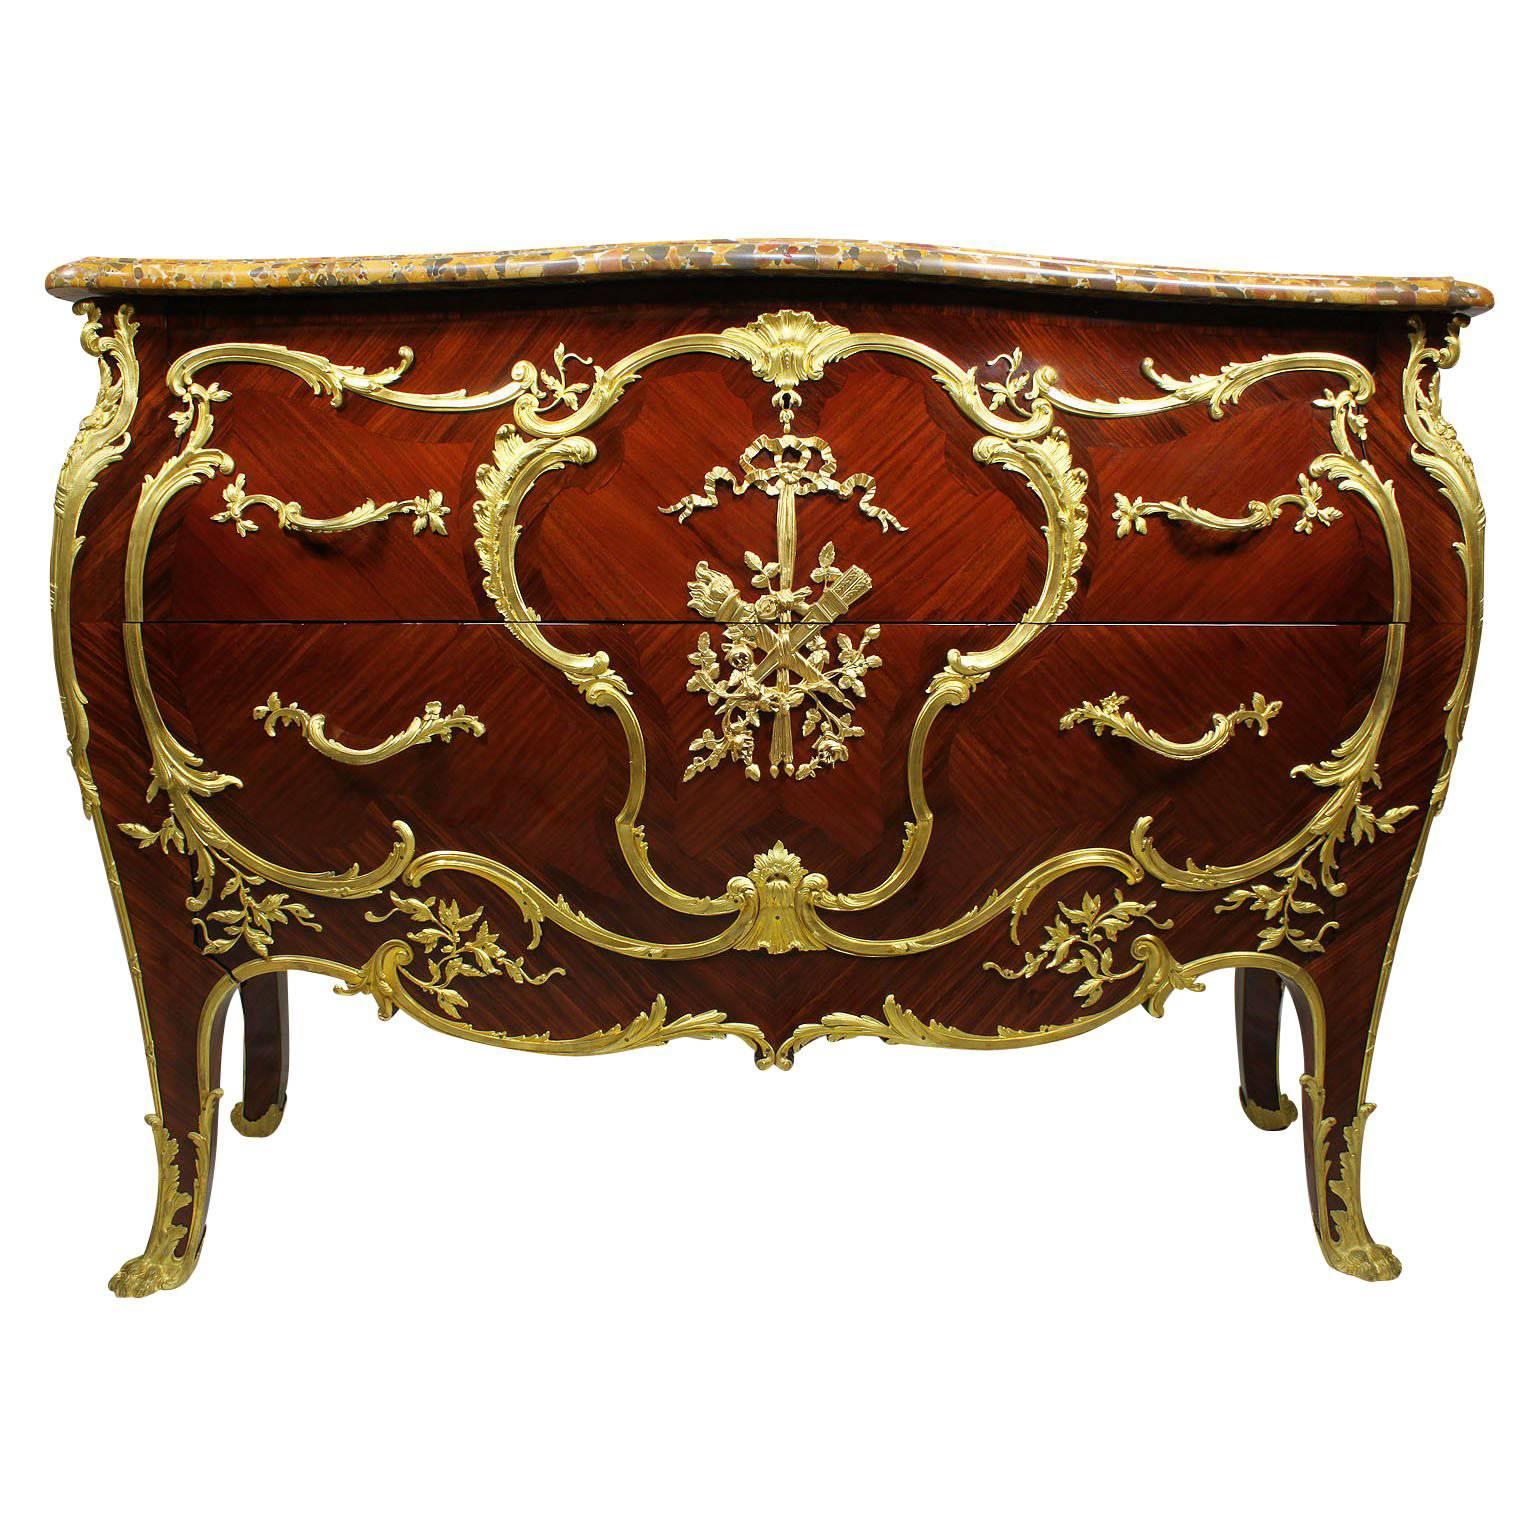 French 19th-20th Century Louis XV Style Ormolu-Mounted Commode